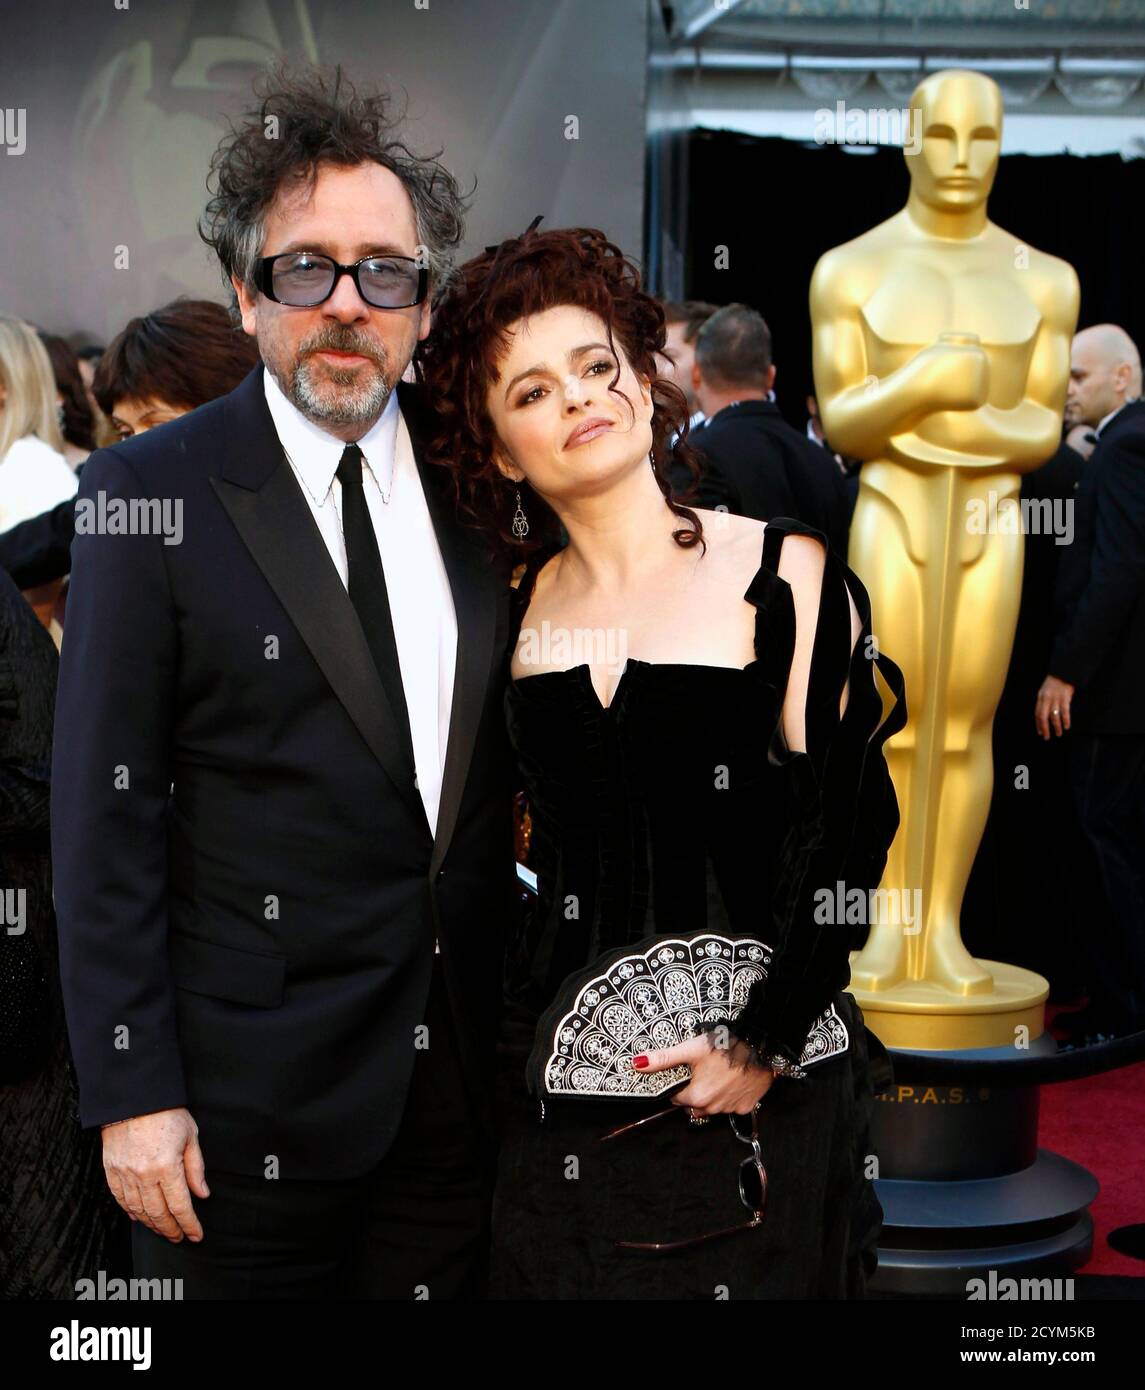 British actress Helena Bonham Carter, best supporting actress nominee for  her role in "The King's Speech," and her partner director Tim Burton arrive  at the 83rd Academy Awards in Hollywood, California February